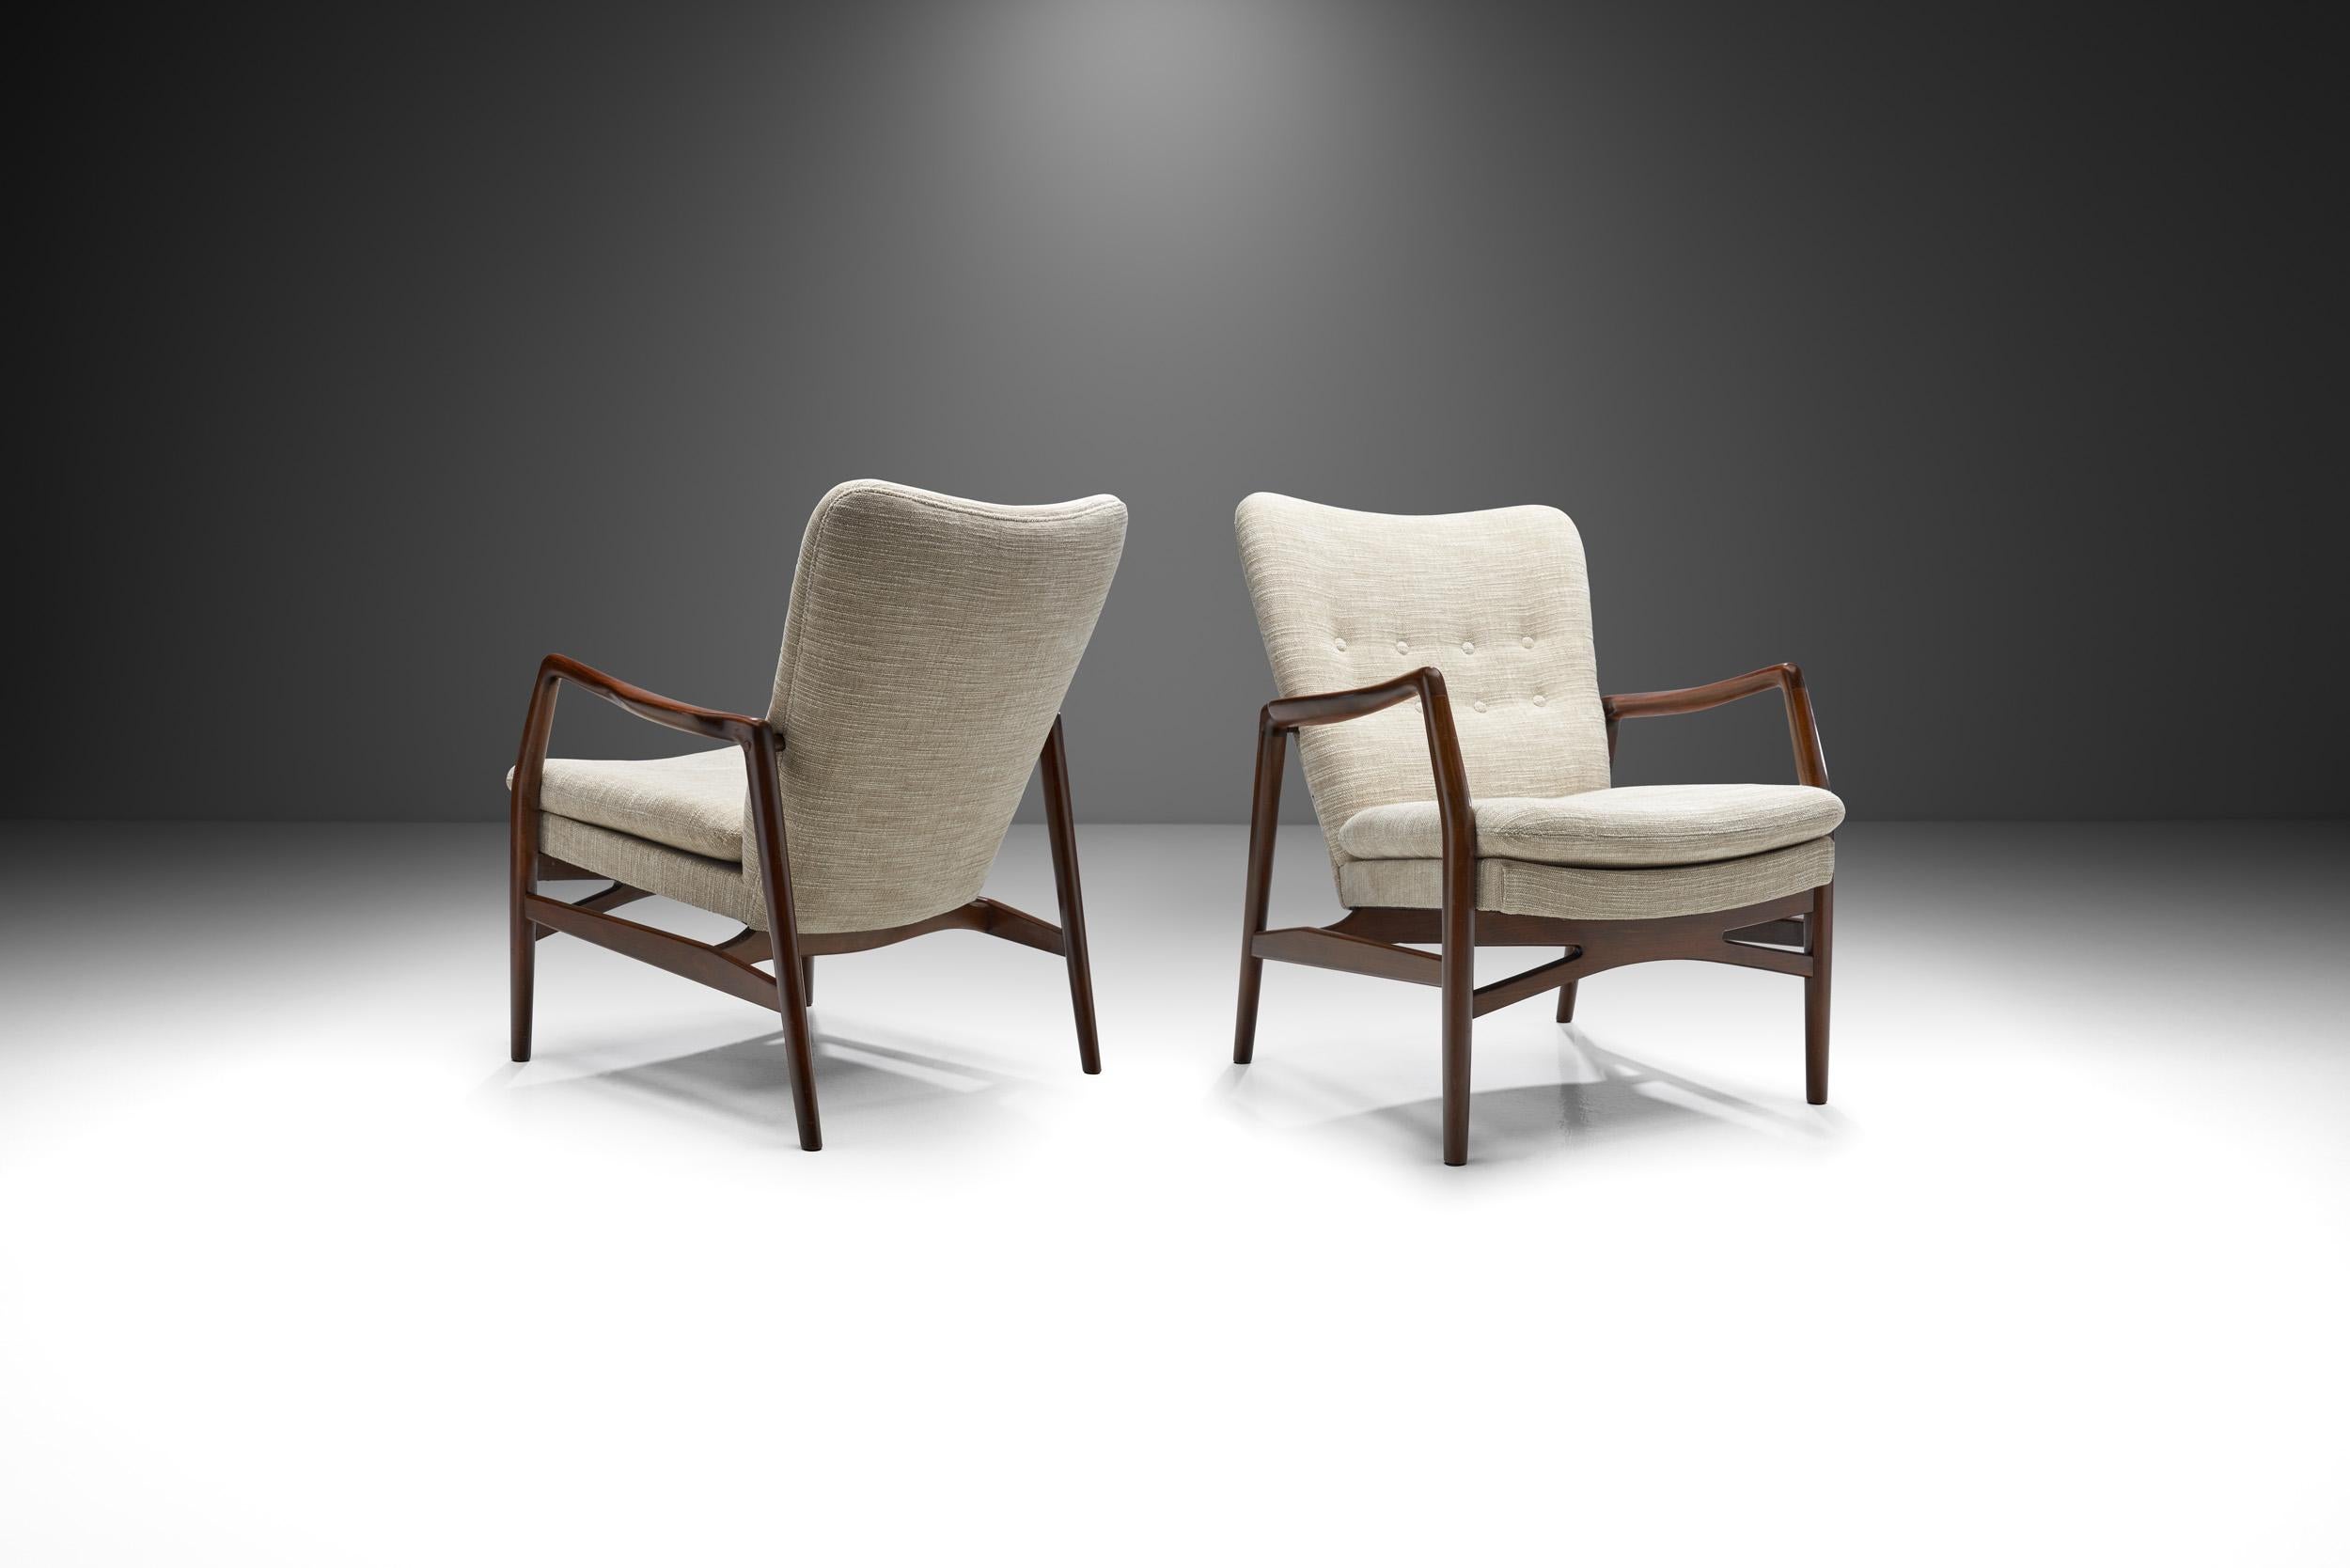 This pair of “Model 215” easy chairs were designed by Danish designer and architect Kurt Olsen, and unifies some of the best characteristics of mid-century Danish design and craftsmanship.

The elegantly modern and precise design of these chairs is